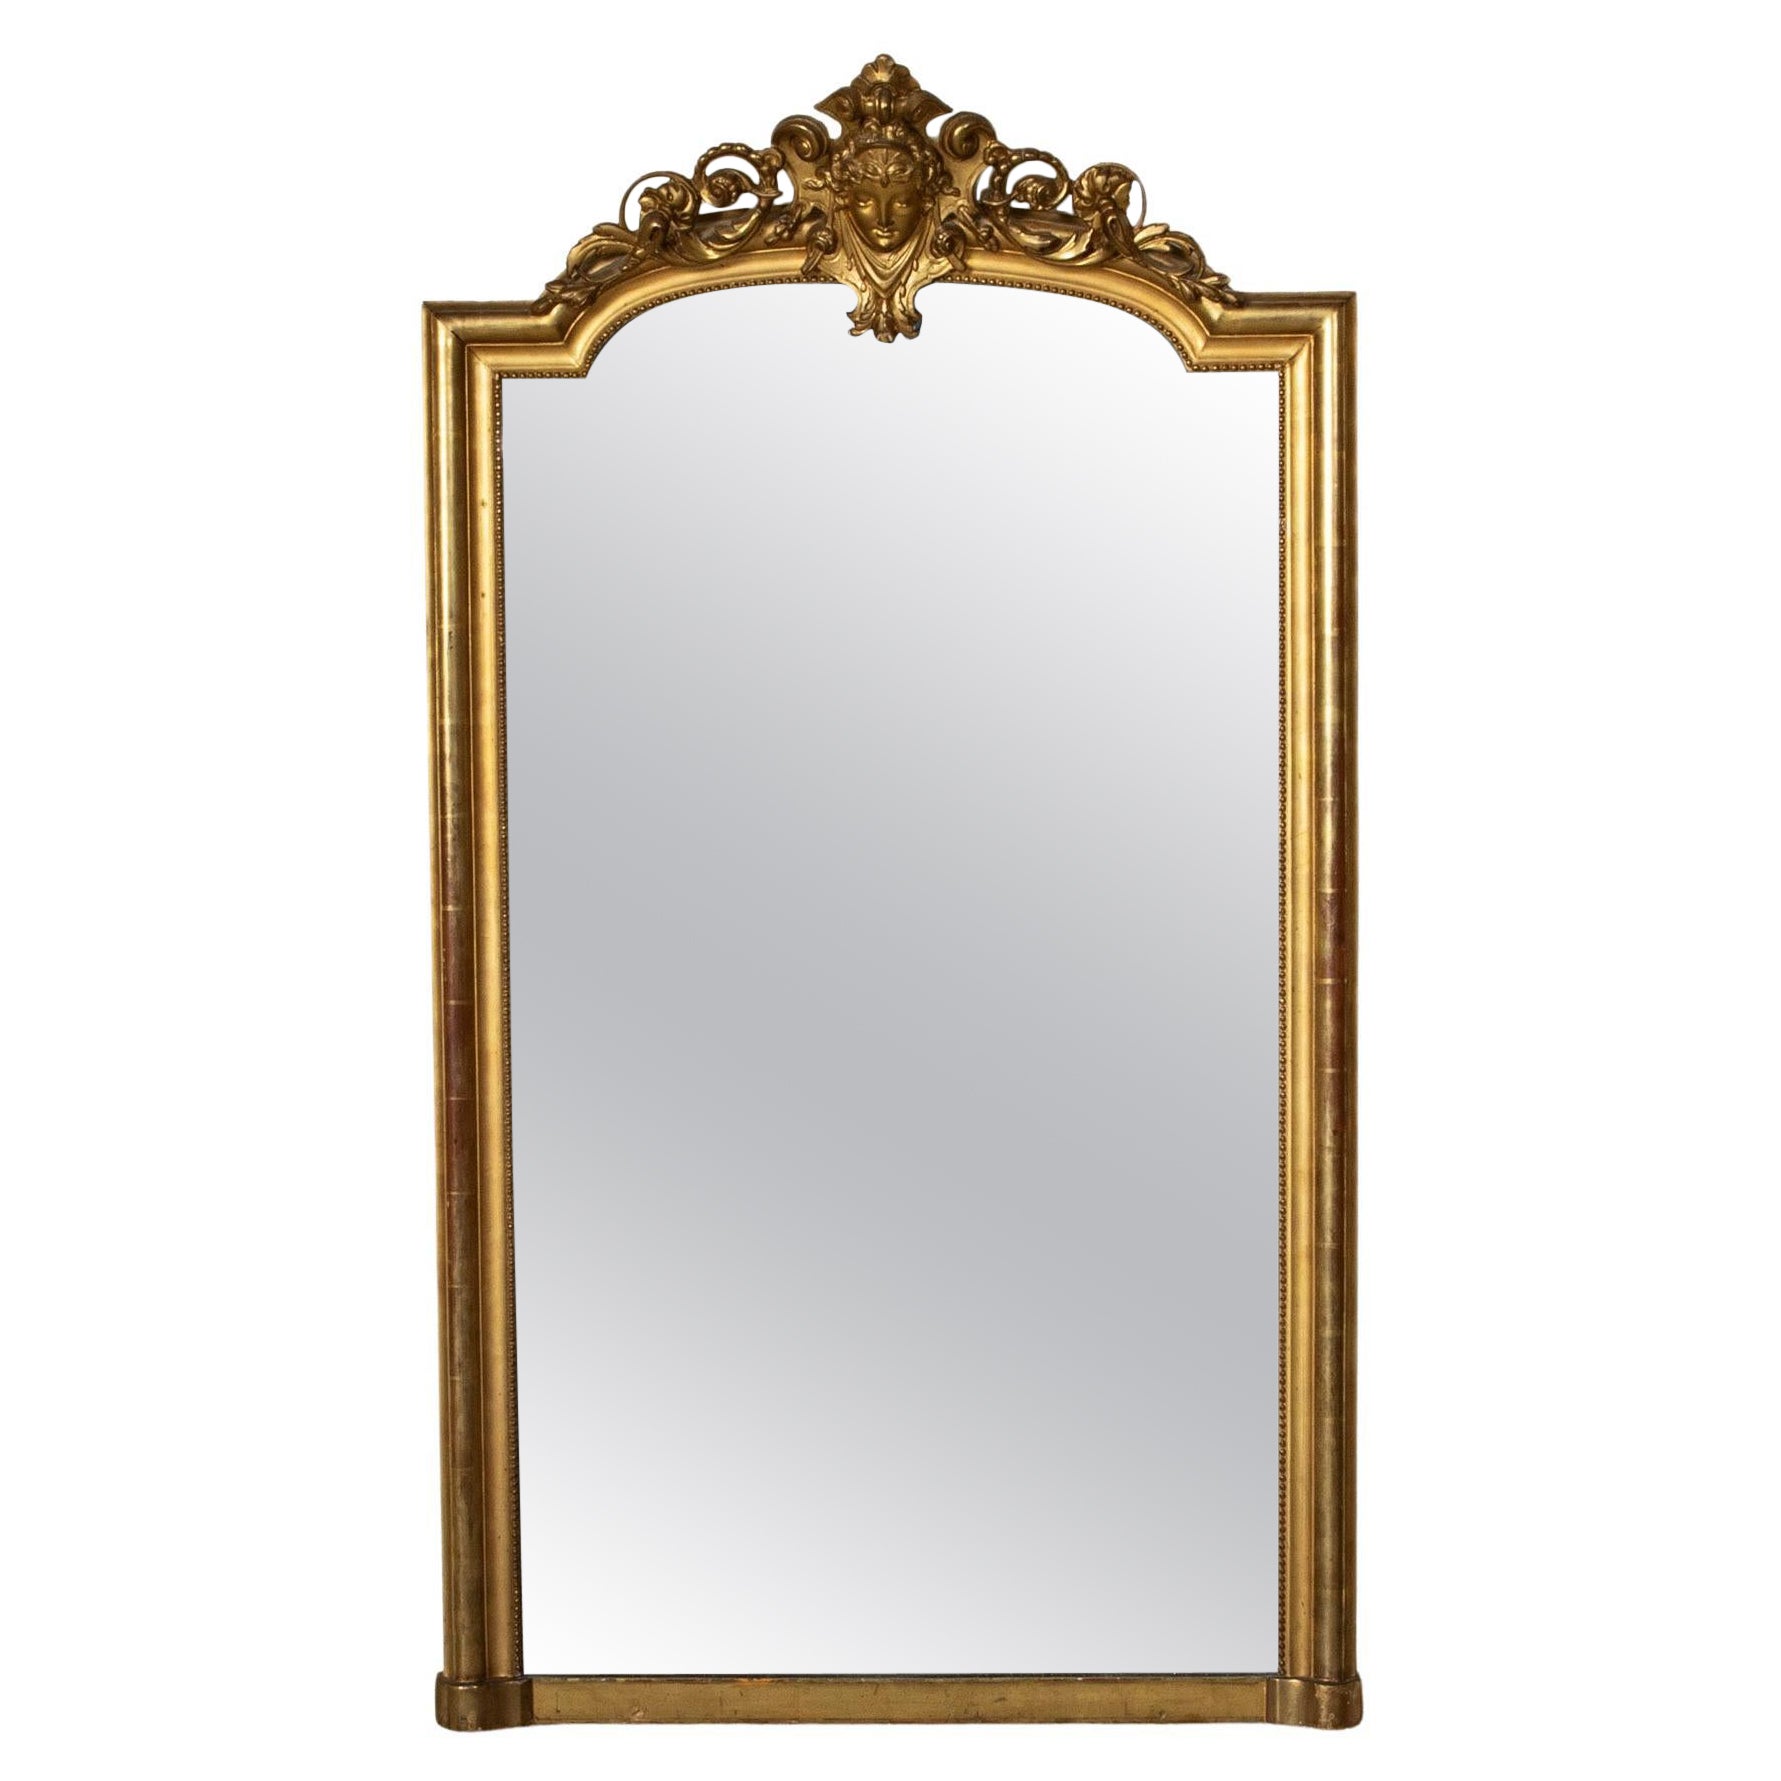 Mid-19th Century Napoleon III Period French Gilt Wood Mantel Mirror with Mask For Sale